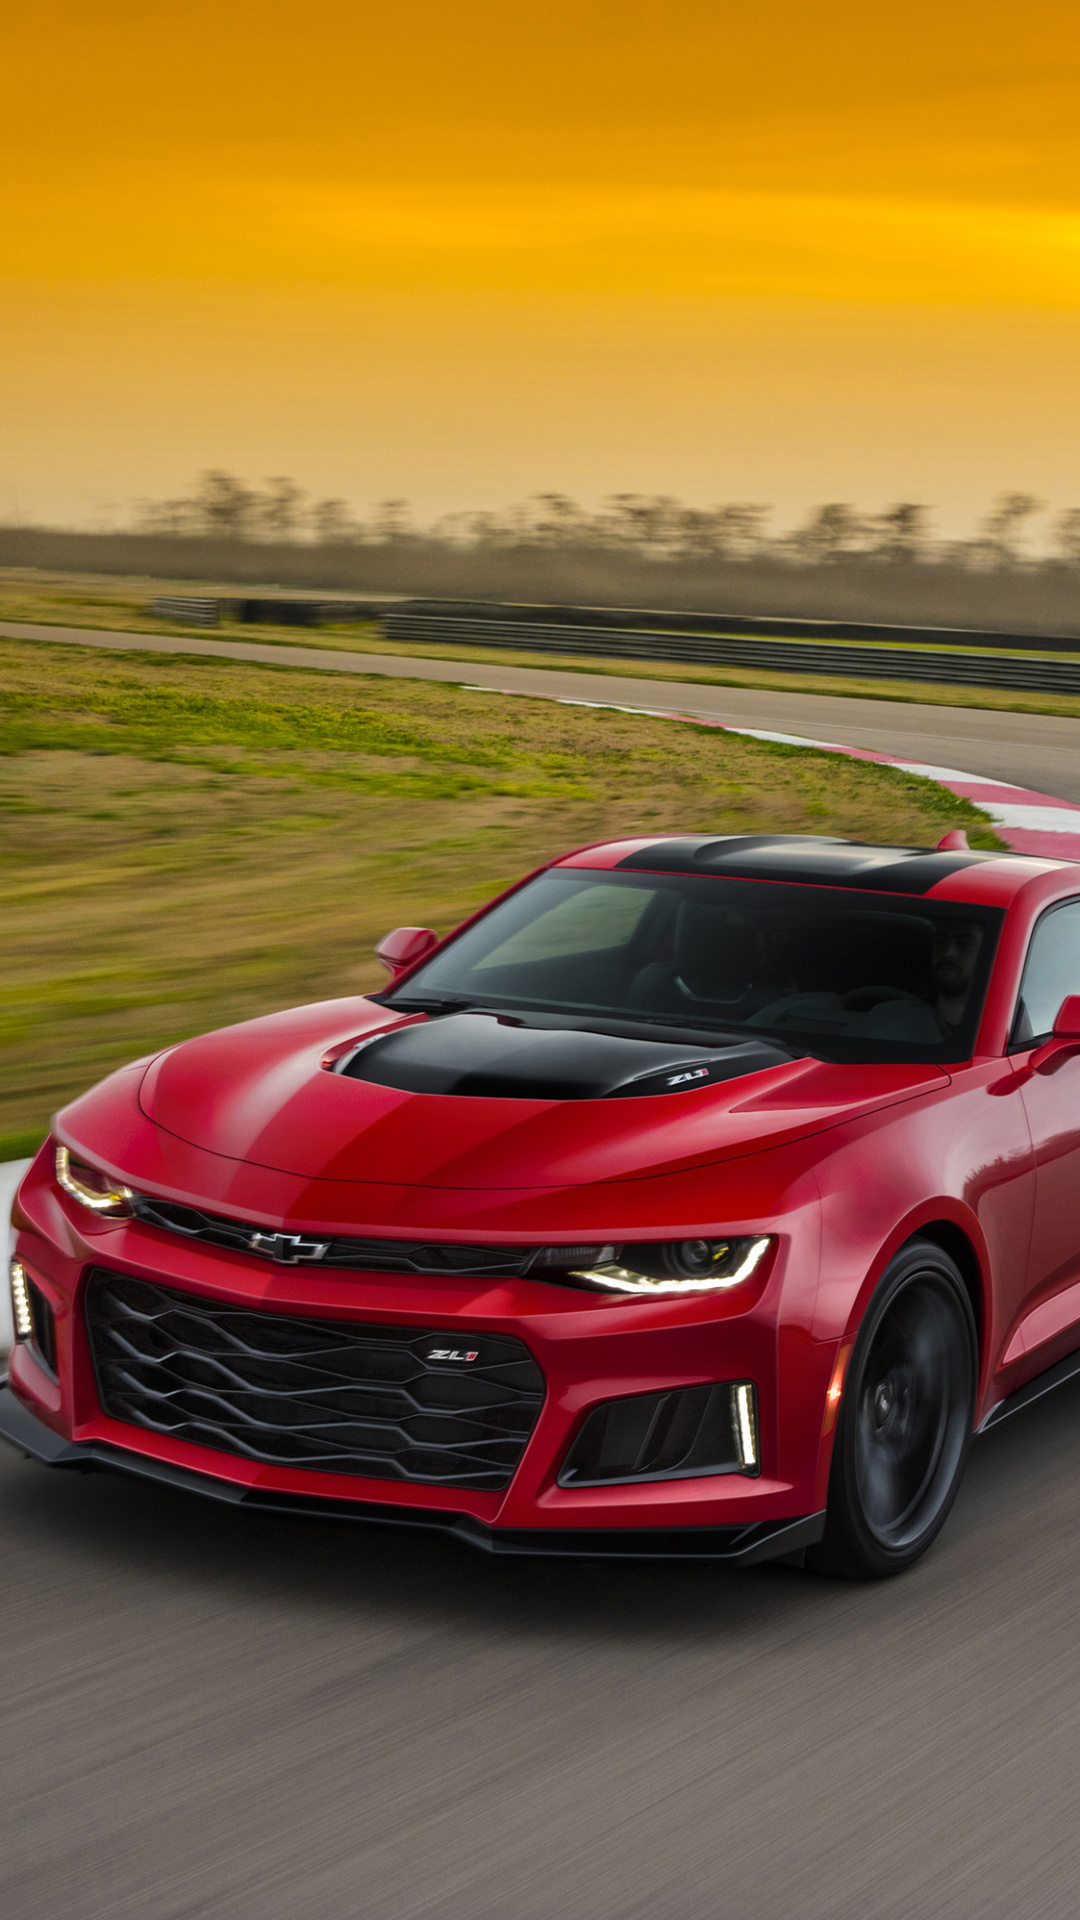 Chevrolet Camaro ZL1 phone wallpaper, Mobile customization, Personalize your screen, High-powered beauty, Free download, 1080x1920 Full HD Phone